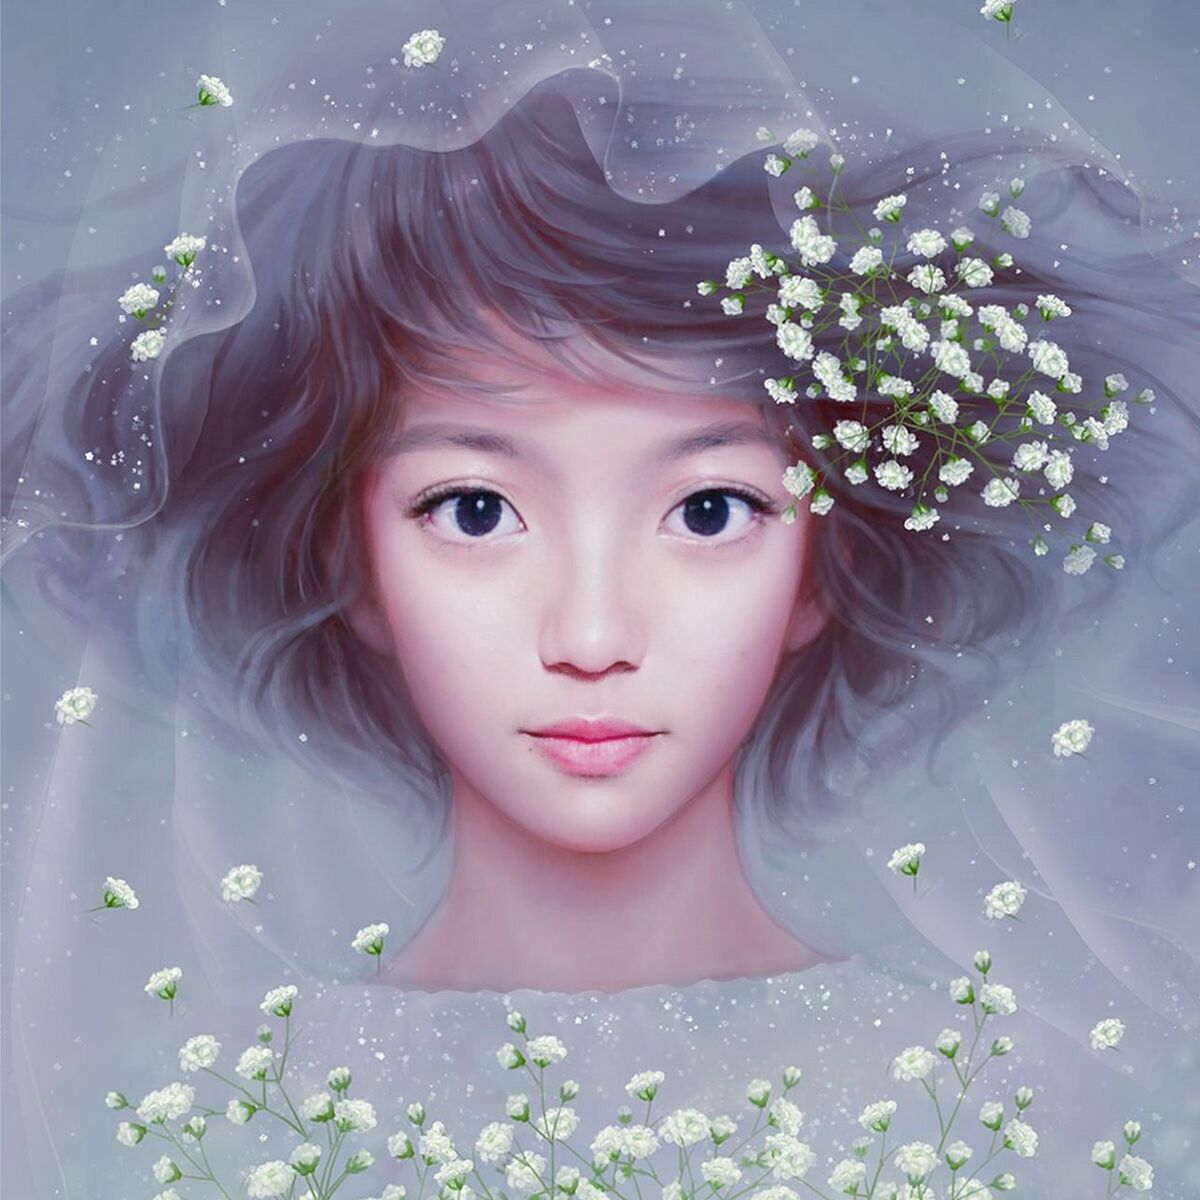 fantasy, beauty, beautiful people, portrait, headshot, child, flower, people, inspiration, cheerful, close-up, human lips, one person, adult